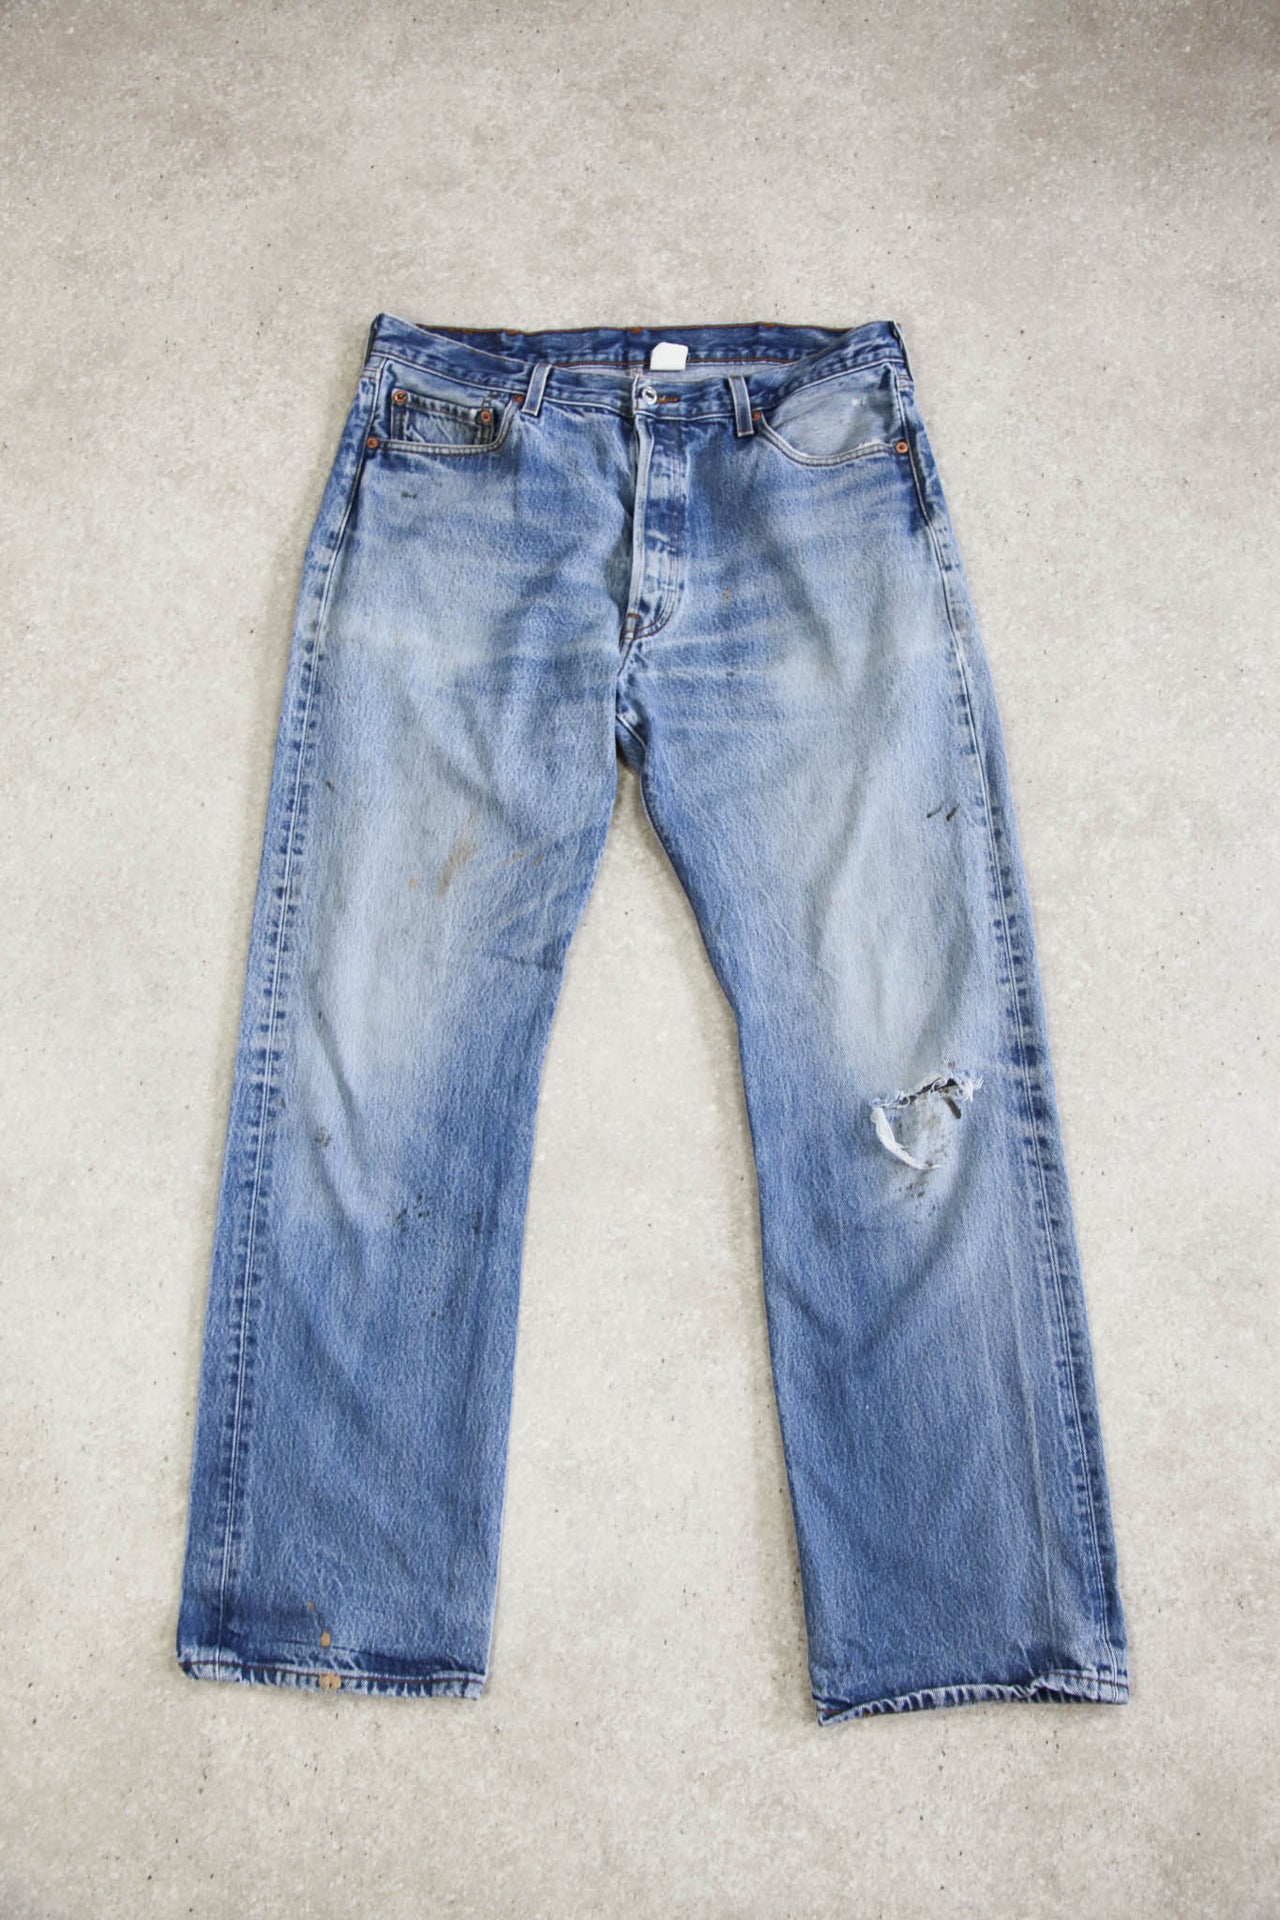 Made in USA Levi's 501 Rip Knee Mid Wash Jeans (W36 L32)